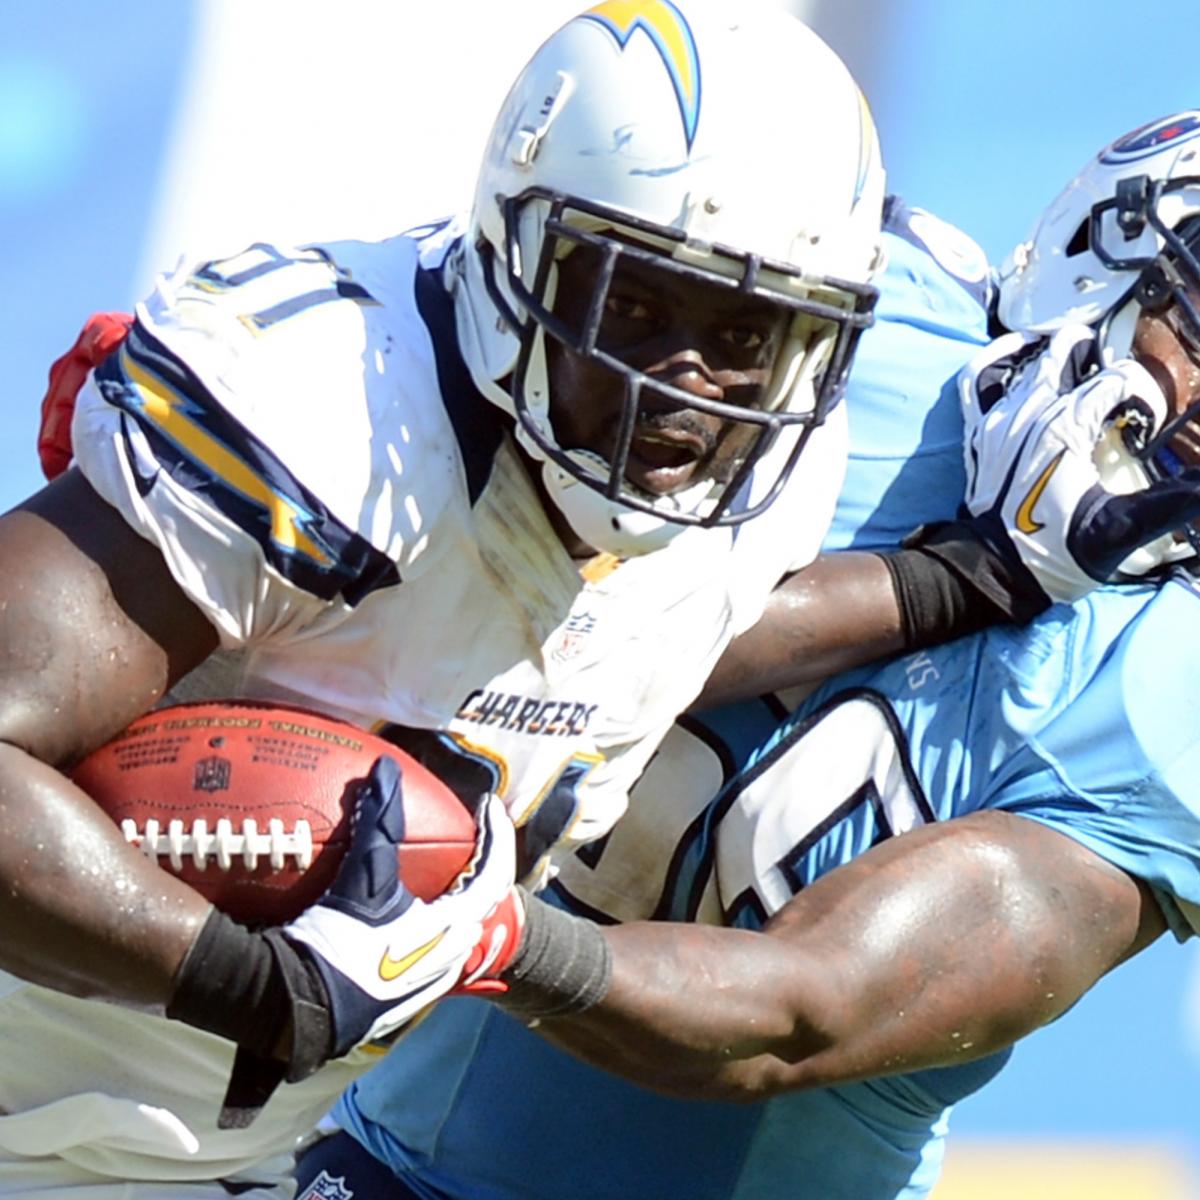 San Diego Chargers Offense, Defense, and Special Teams All Working